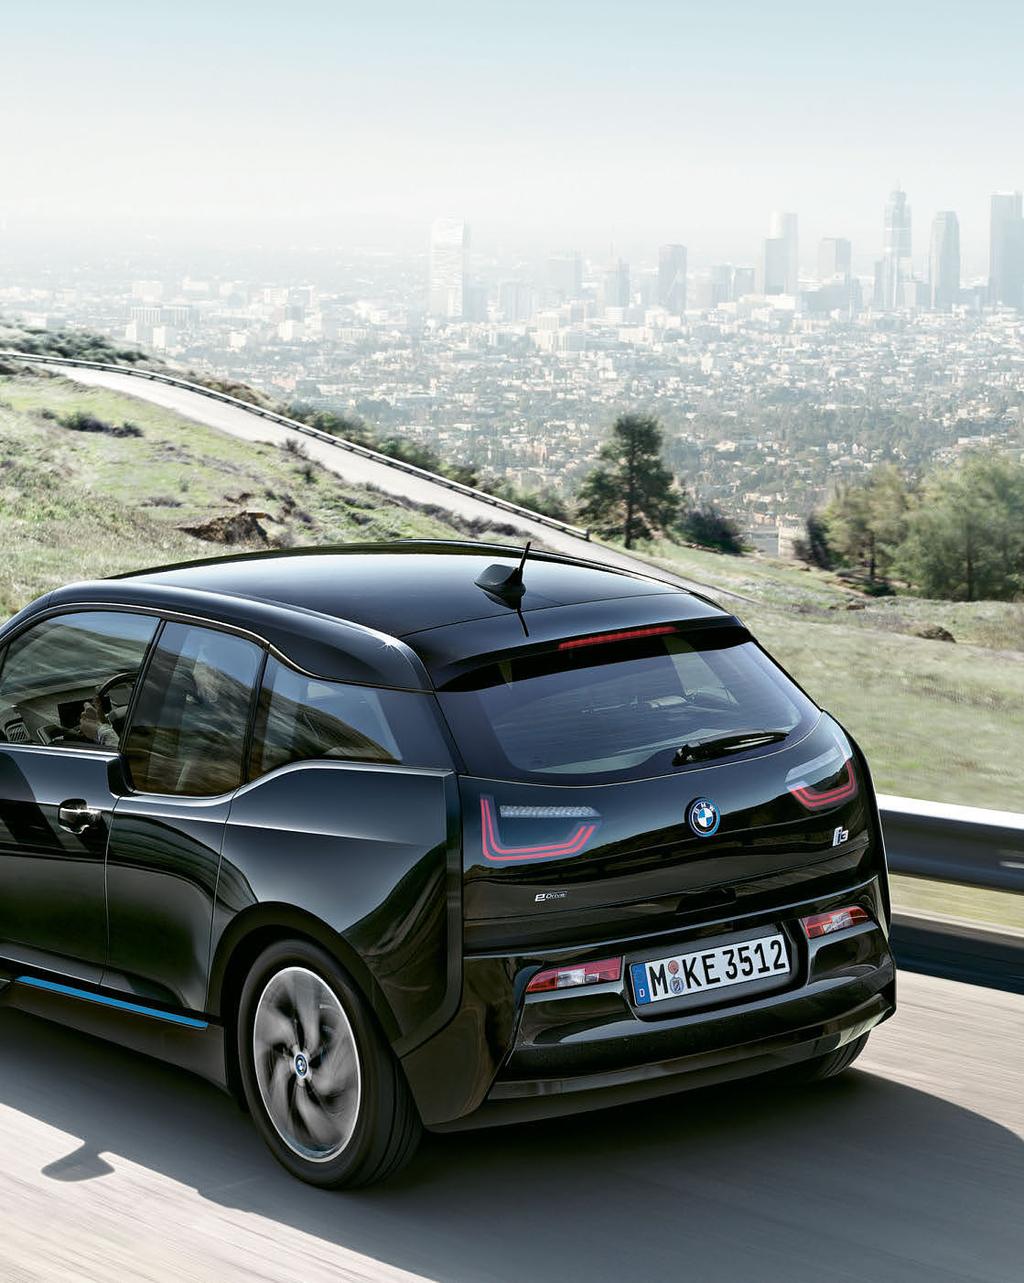 The BMW i3 (60 Ah) already has a stable everyday cruising radius of up to 130 km [New European Driving Cycle (NEDC).